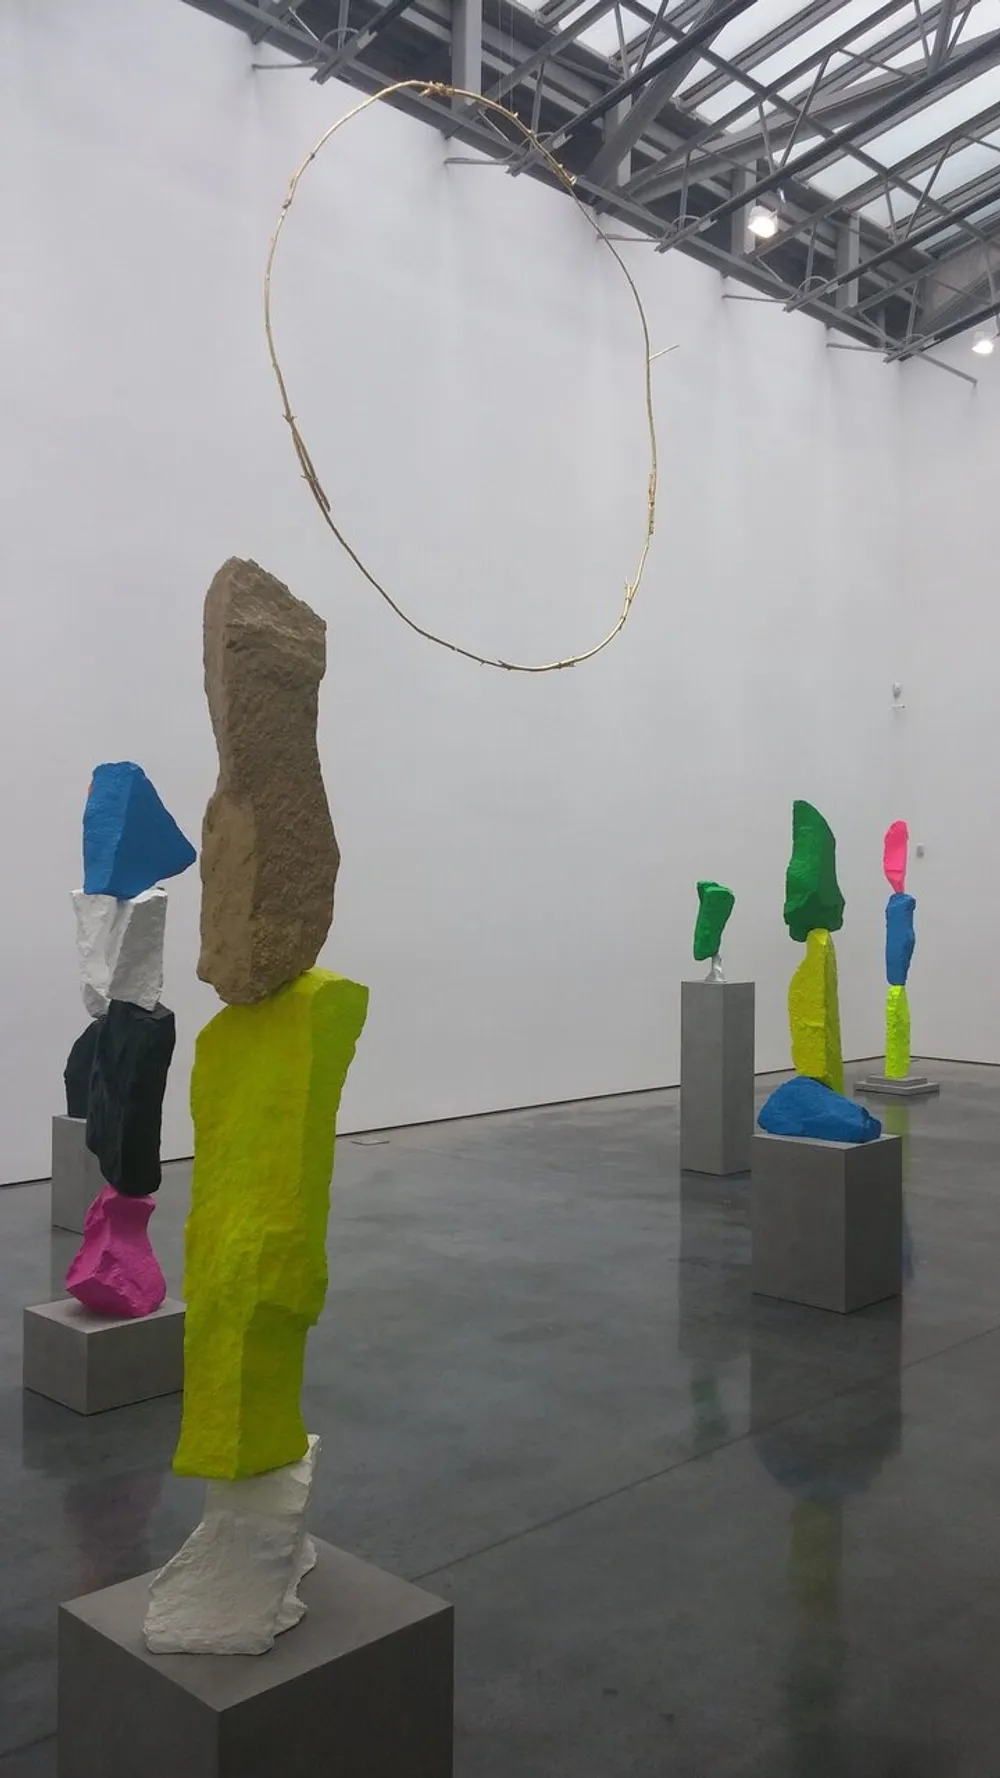 The image shows a contemporary art installation featuring colorful abstract sculptures on pedestals with a large golden loop hanging from the ceiling in the background